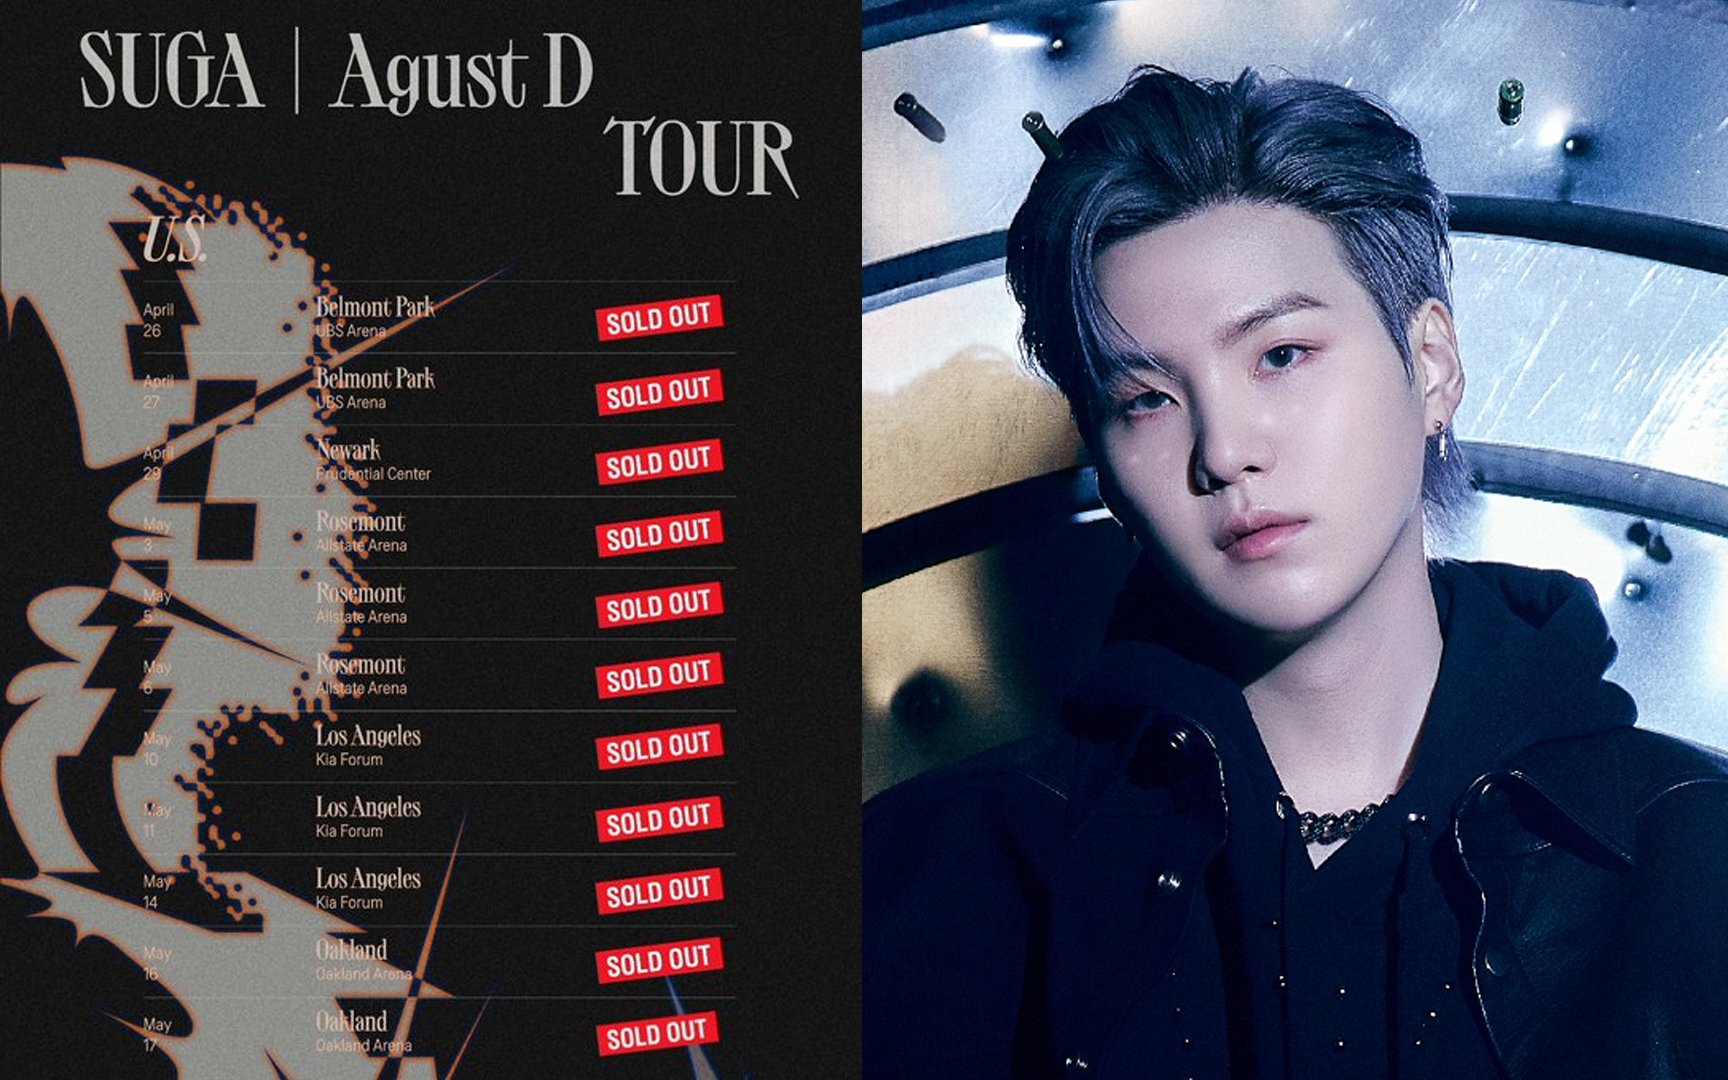 BTS SUGA's first solo World Tour sells out in minutes after fan